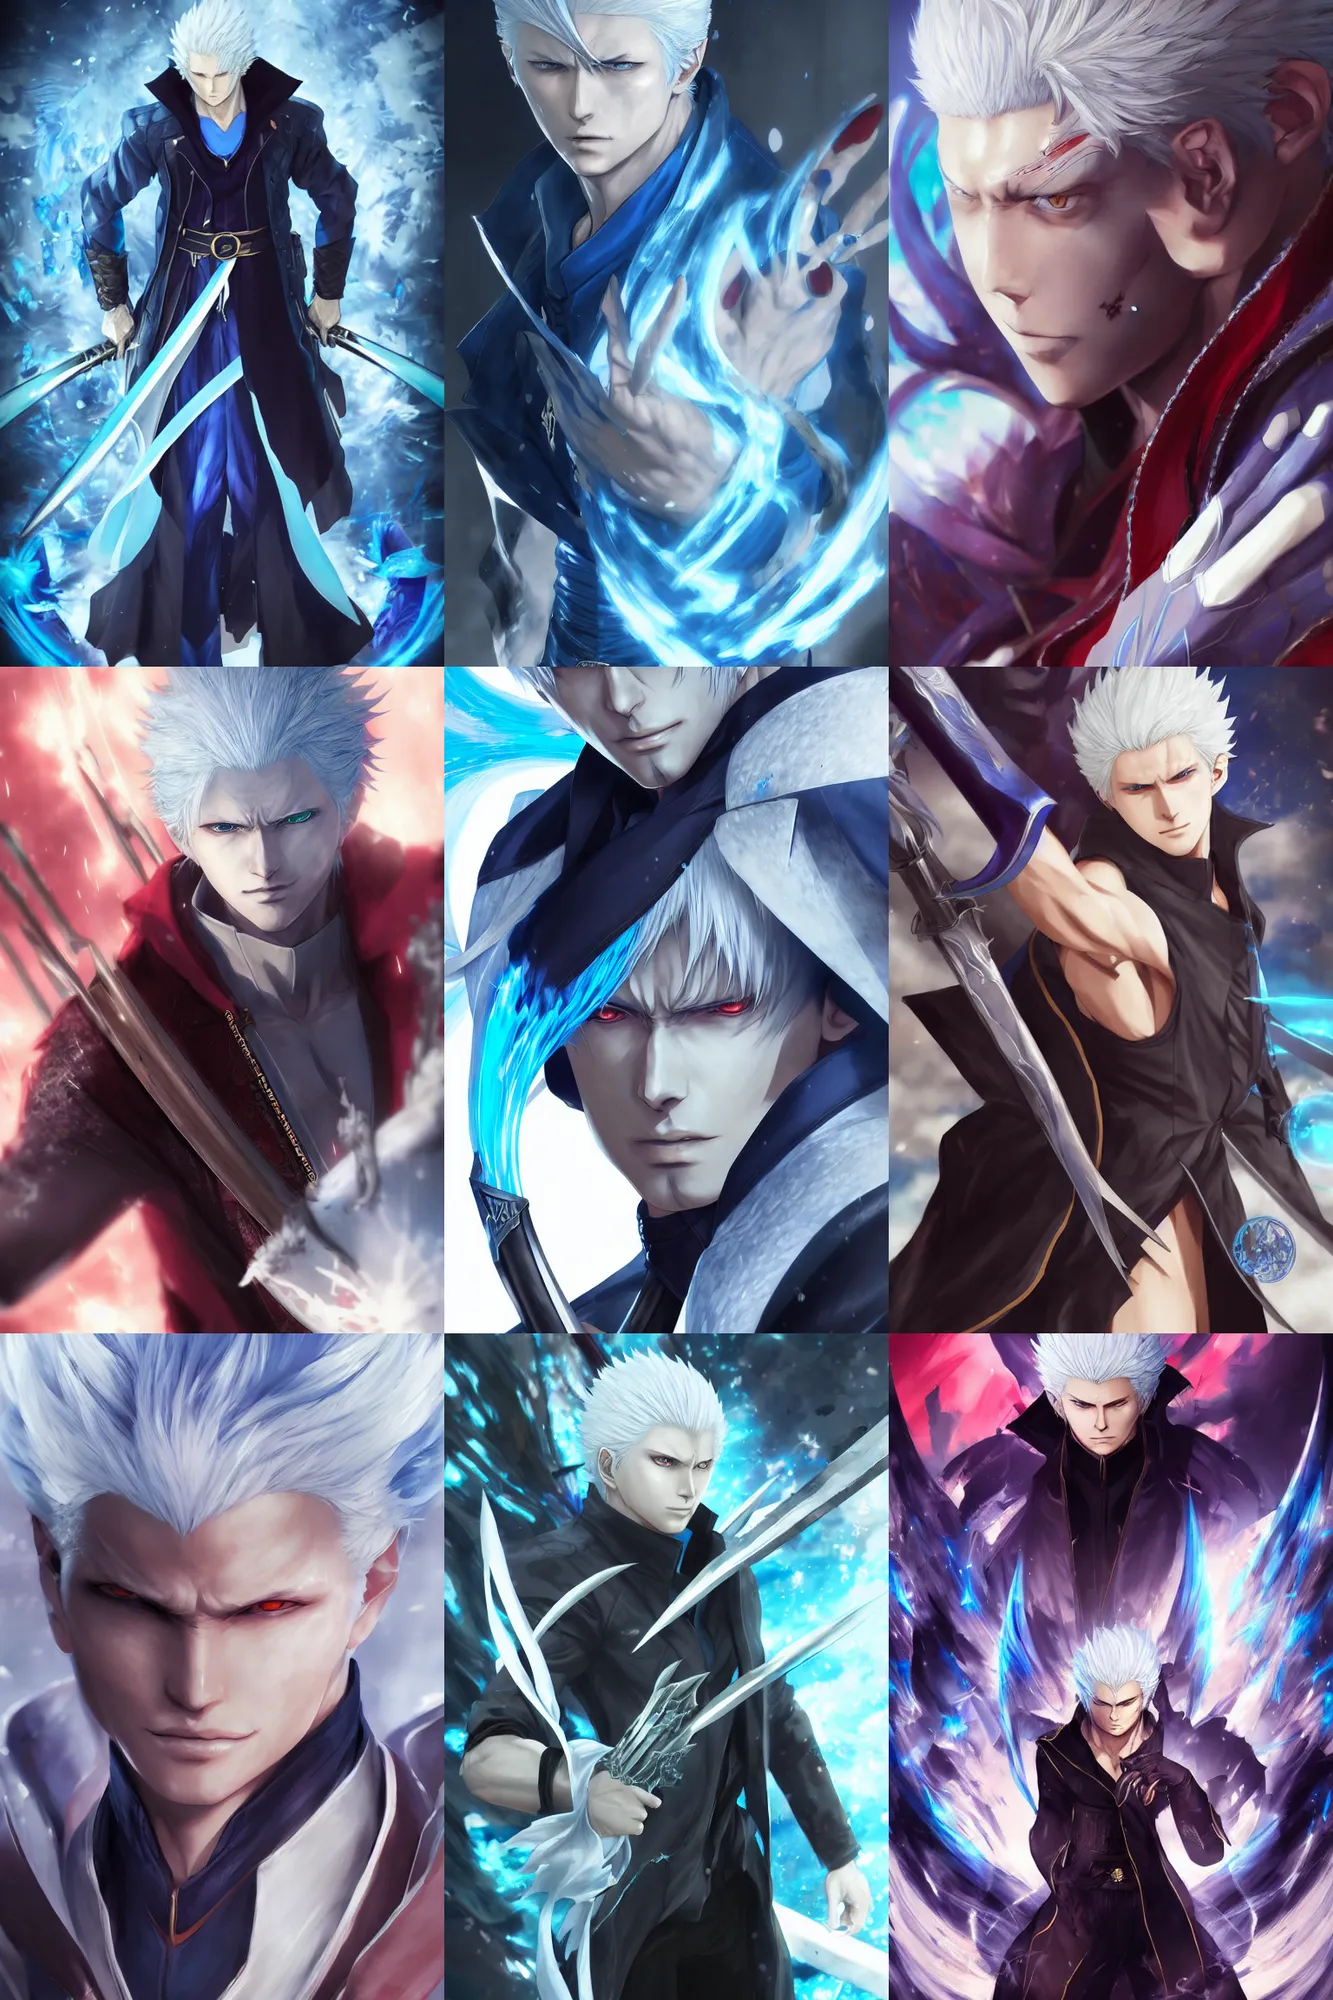 Do you wish that devil may cry 5 kept the anime artstyle? : r/DevilMayCry